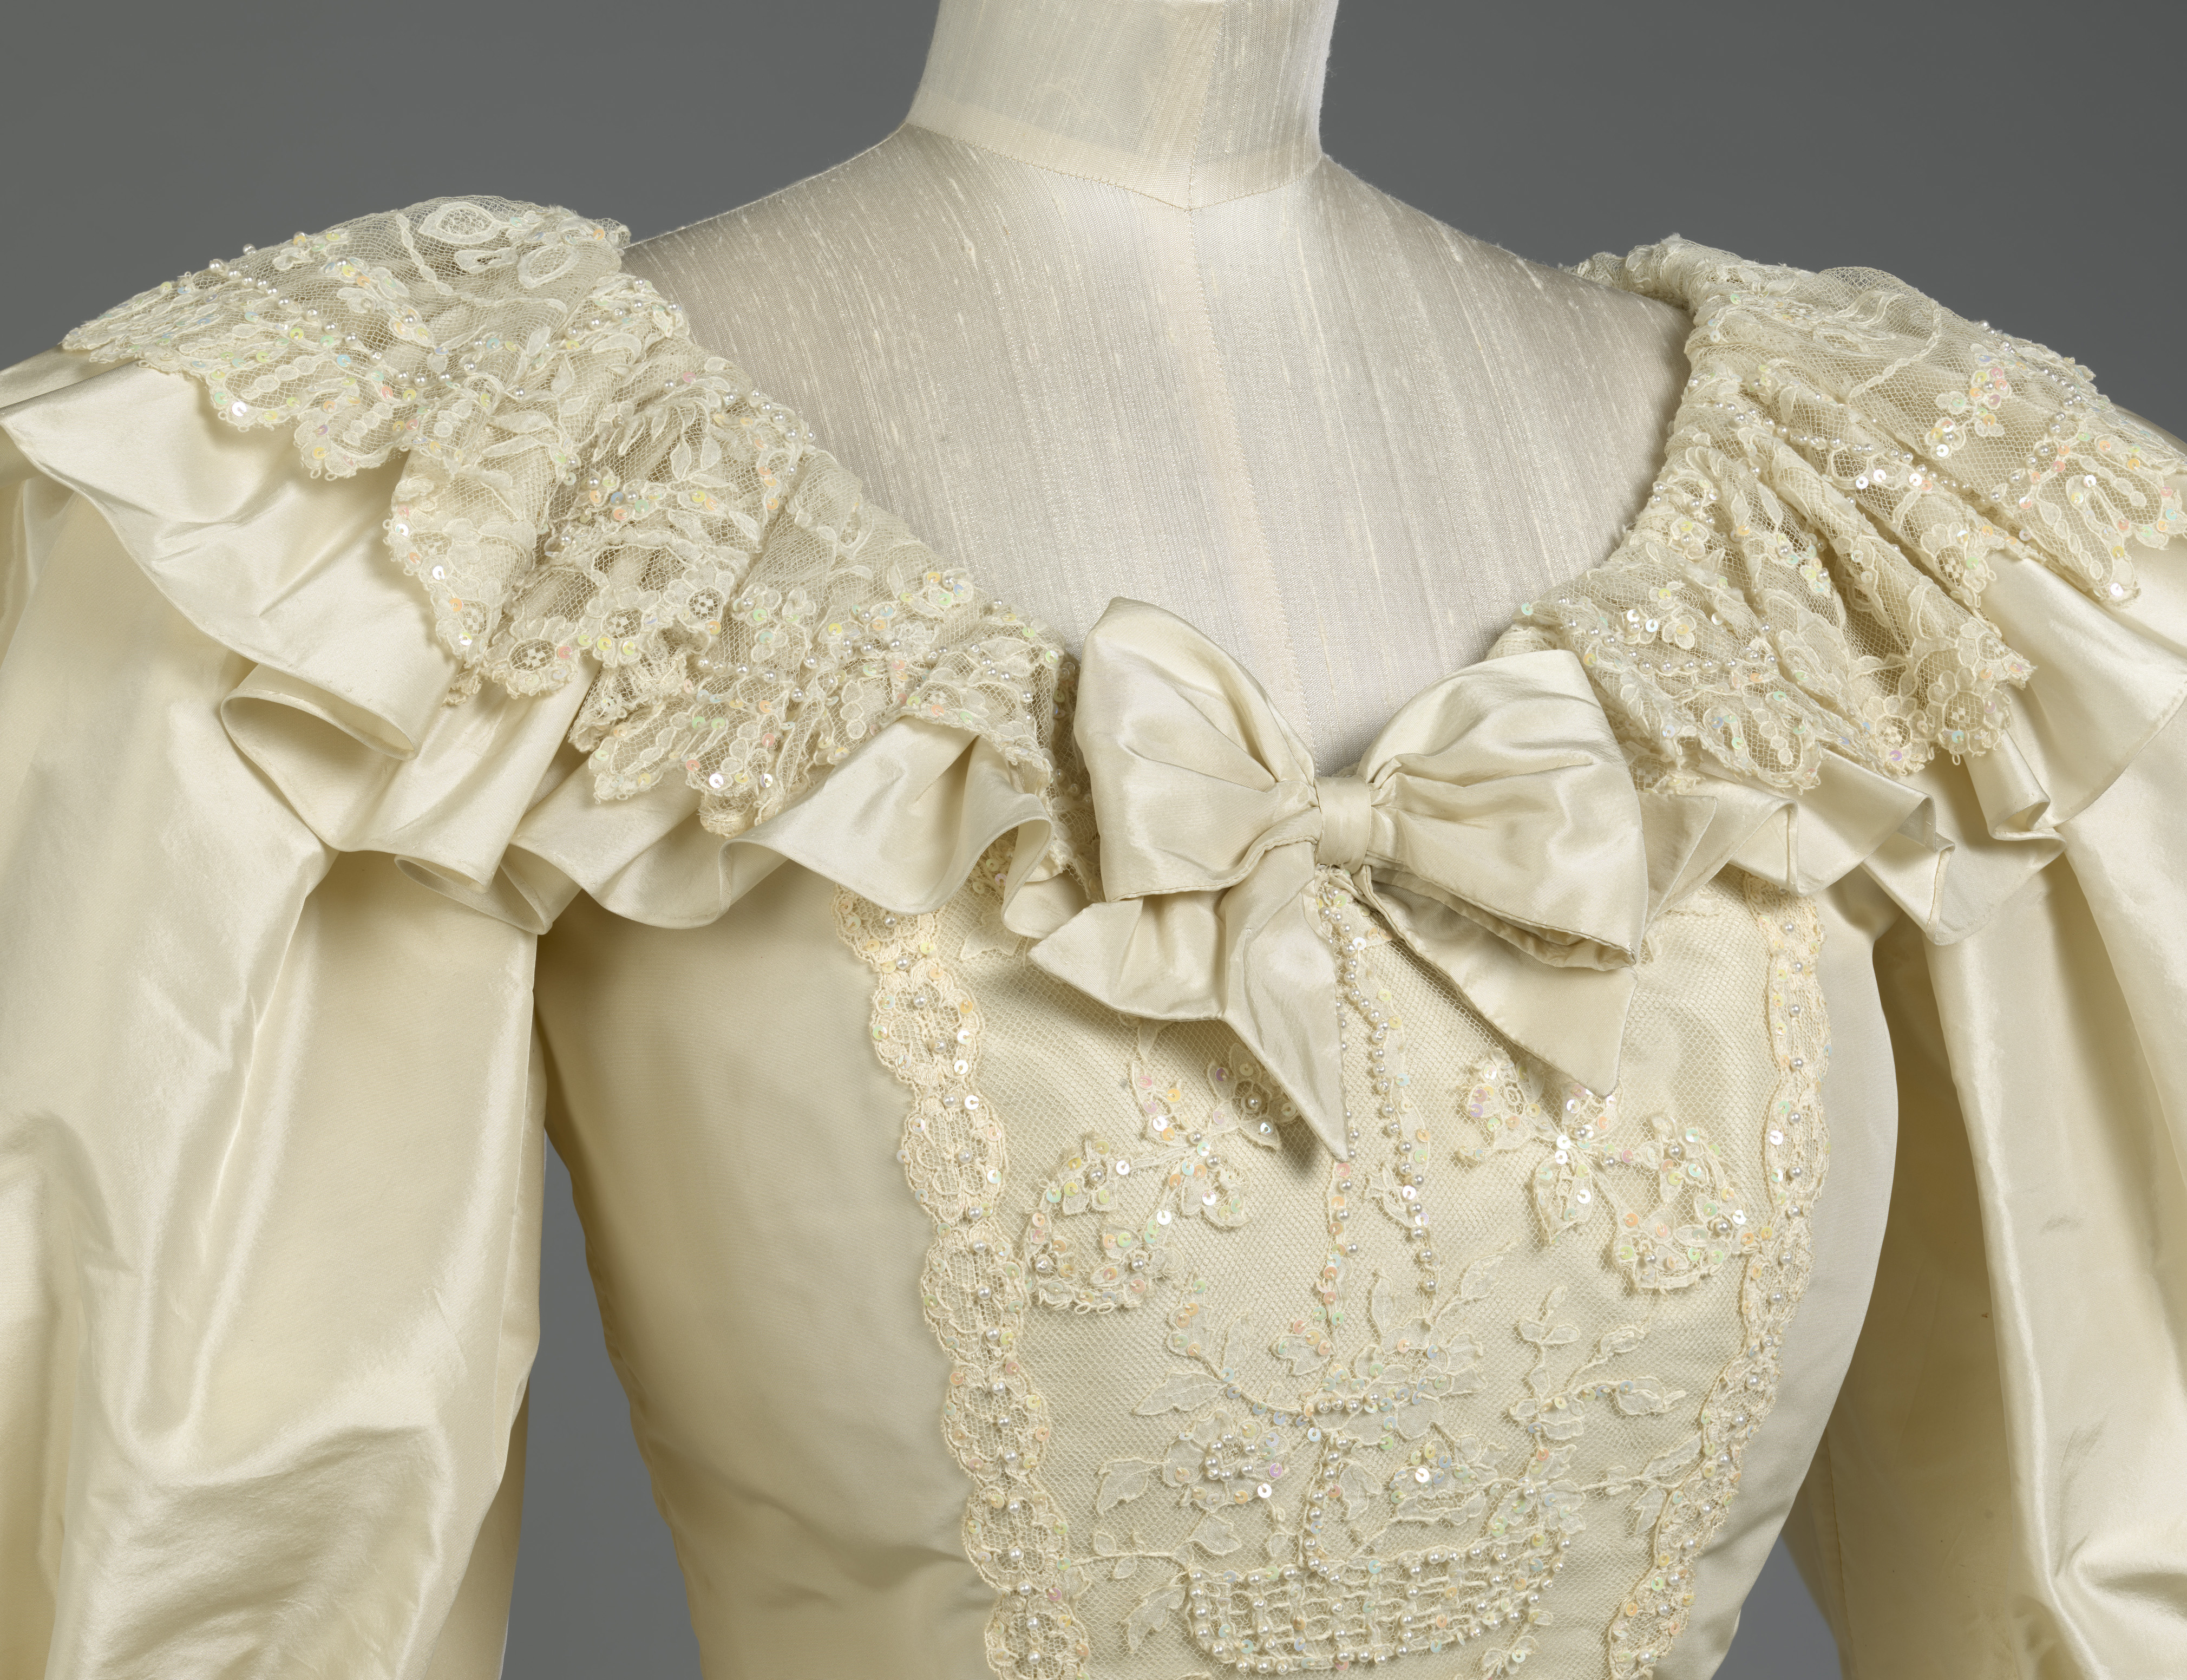 The neckline of the princess's gown